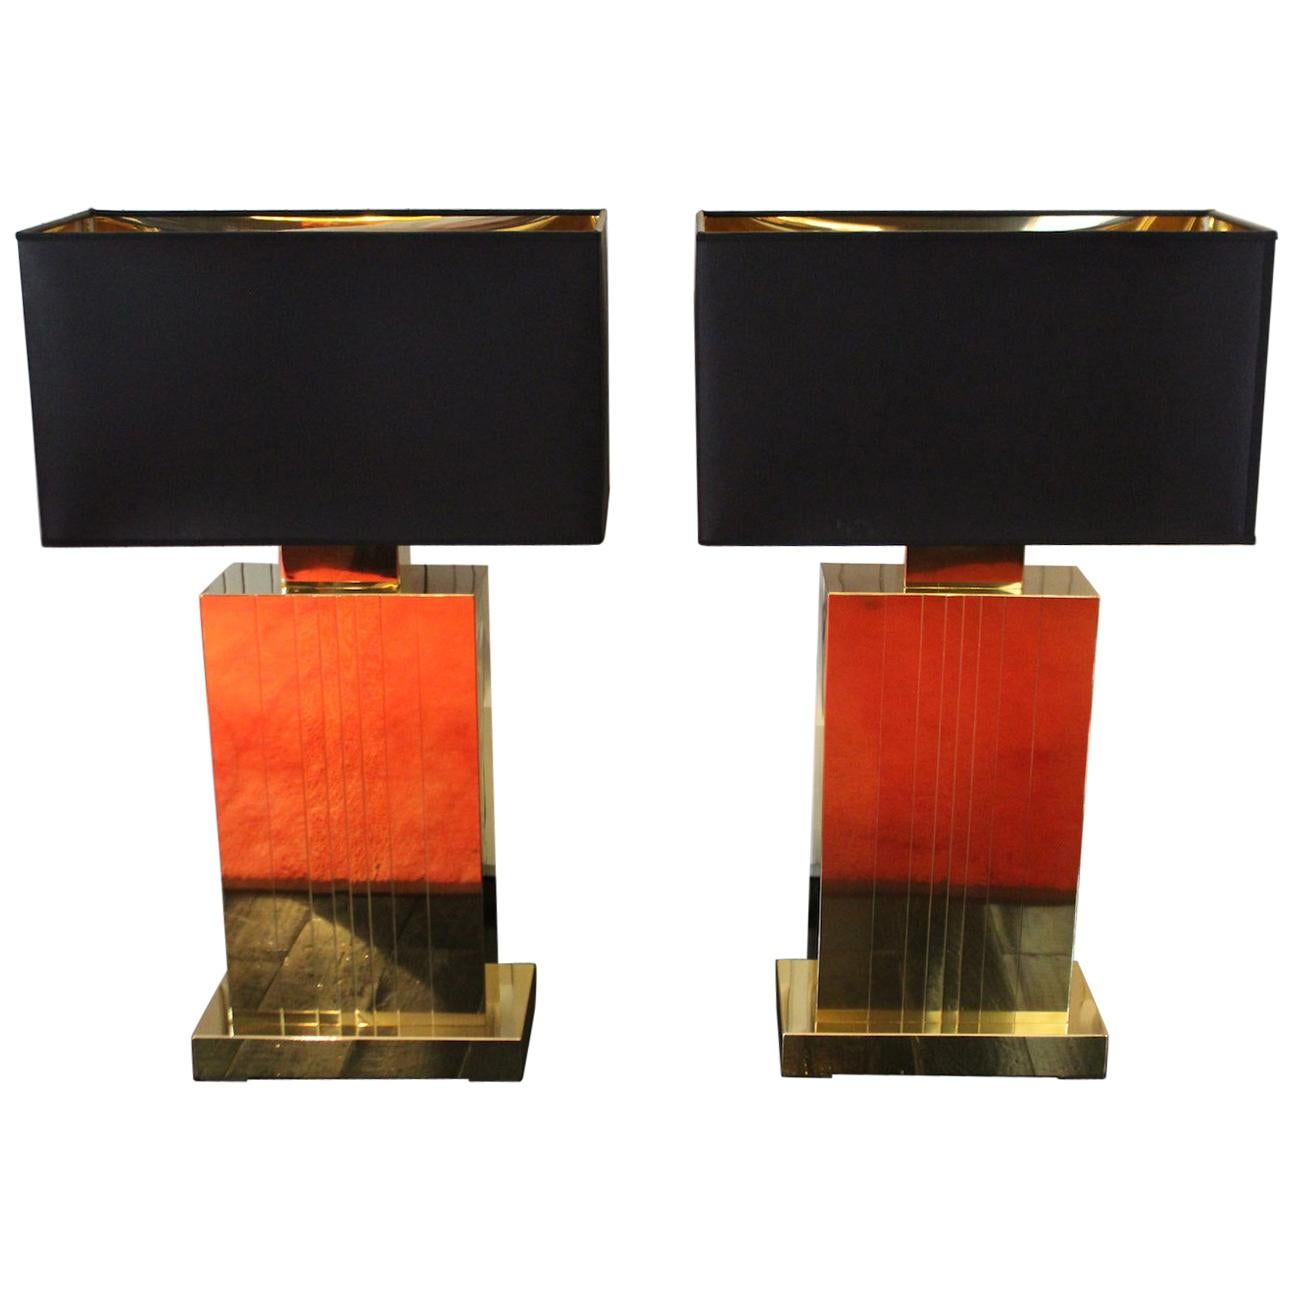 1970s Italian Deco Design Table Lamps Completely in Brass For Sale